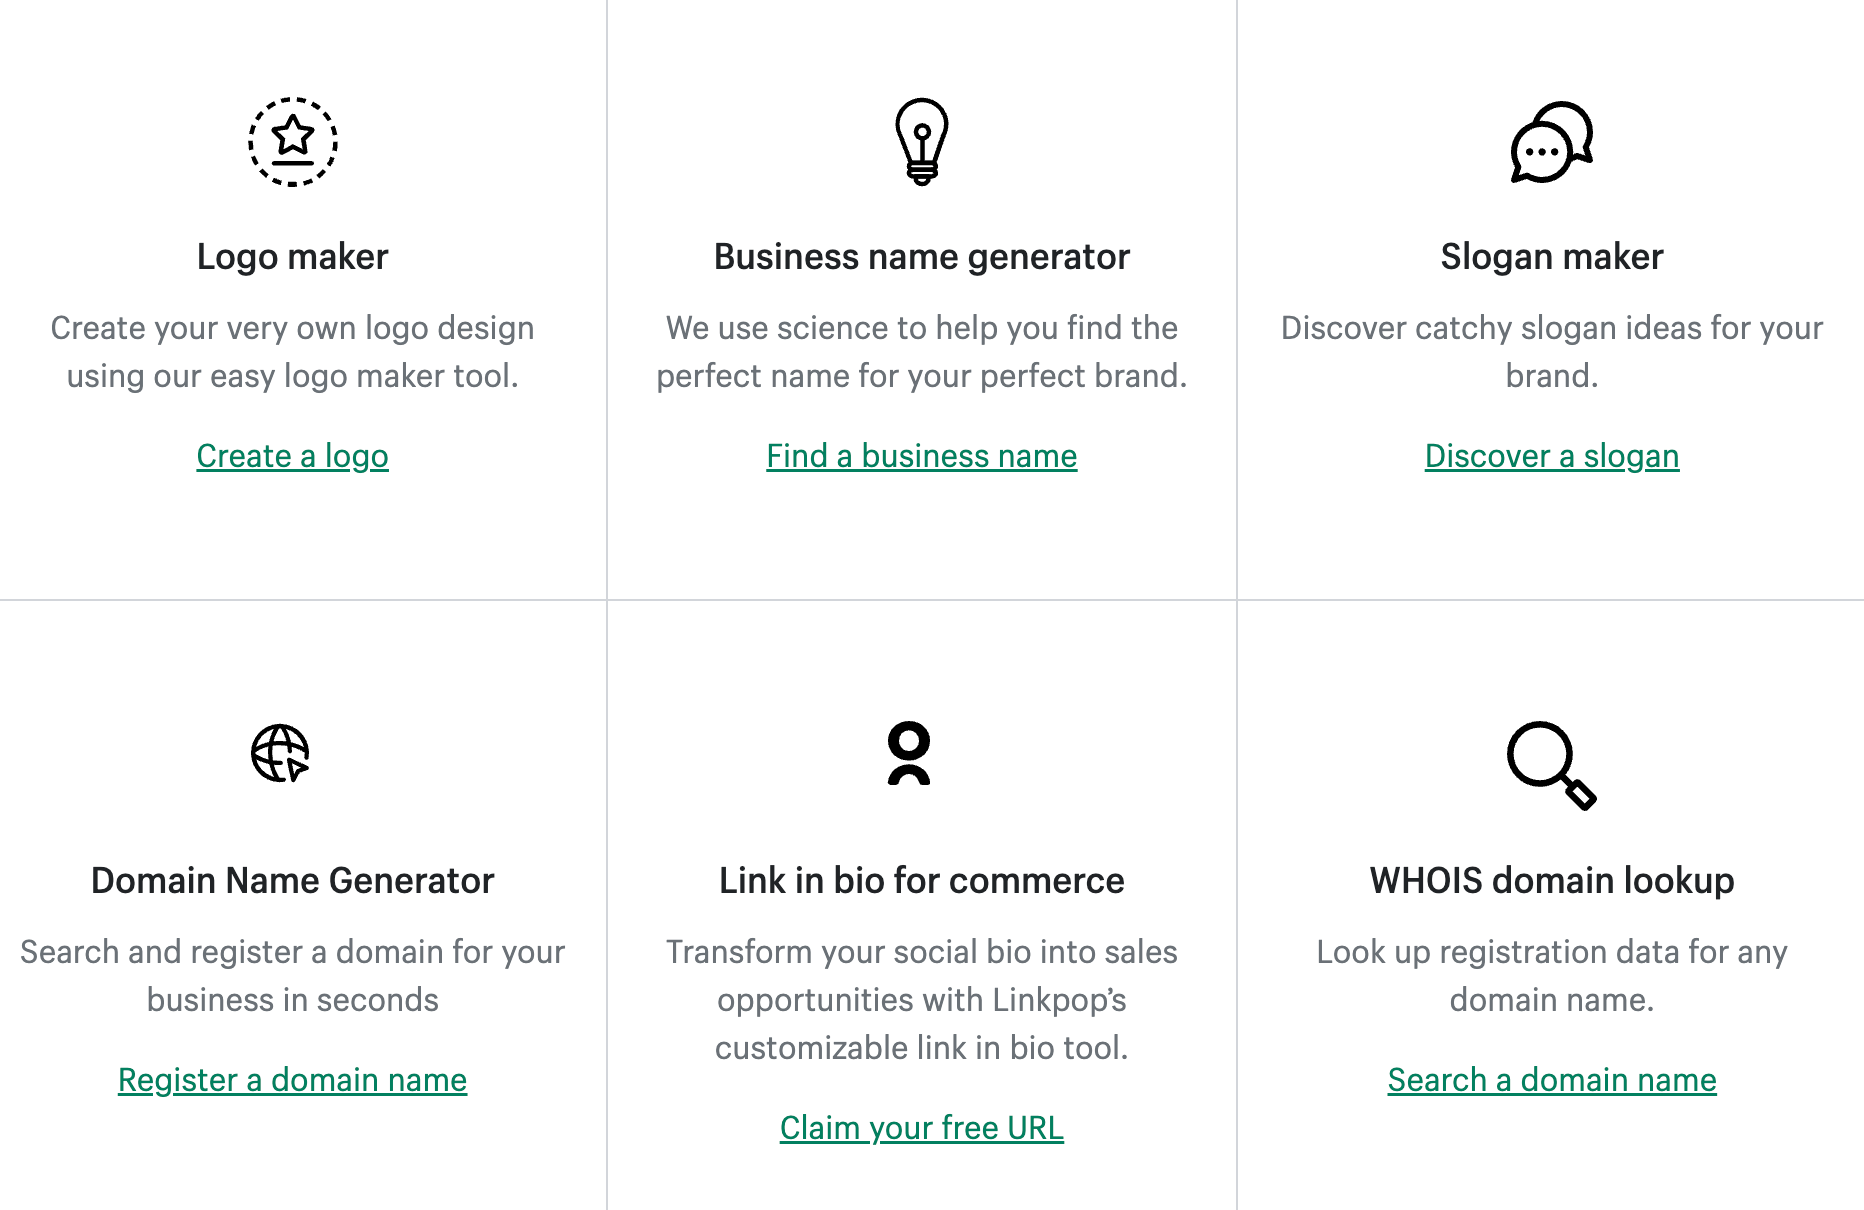 A sample of the free tools offered by Shopify